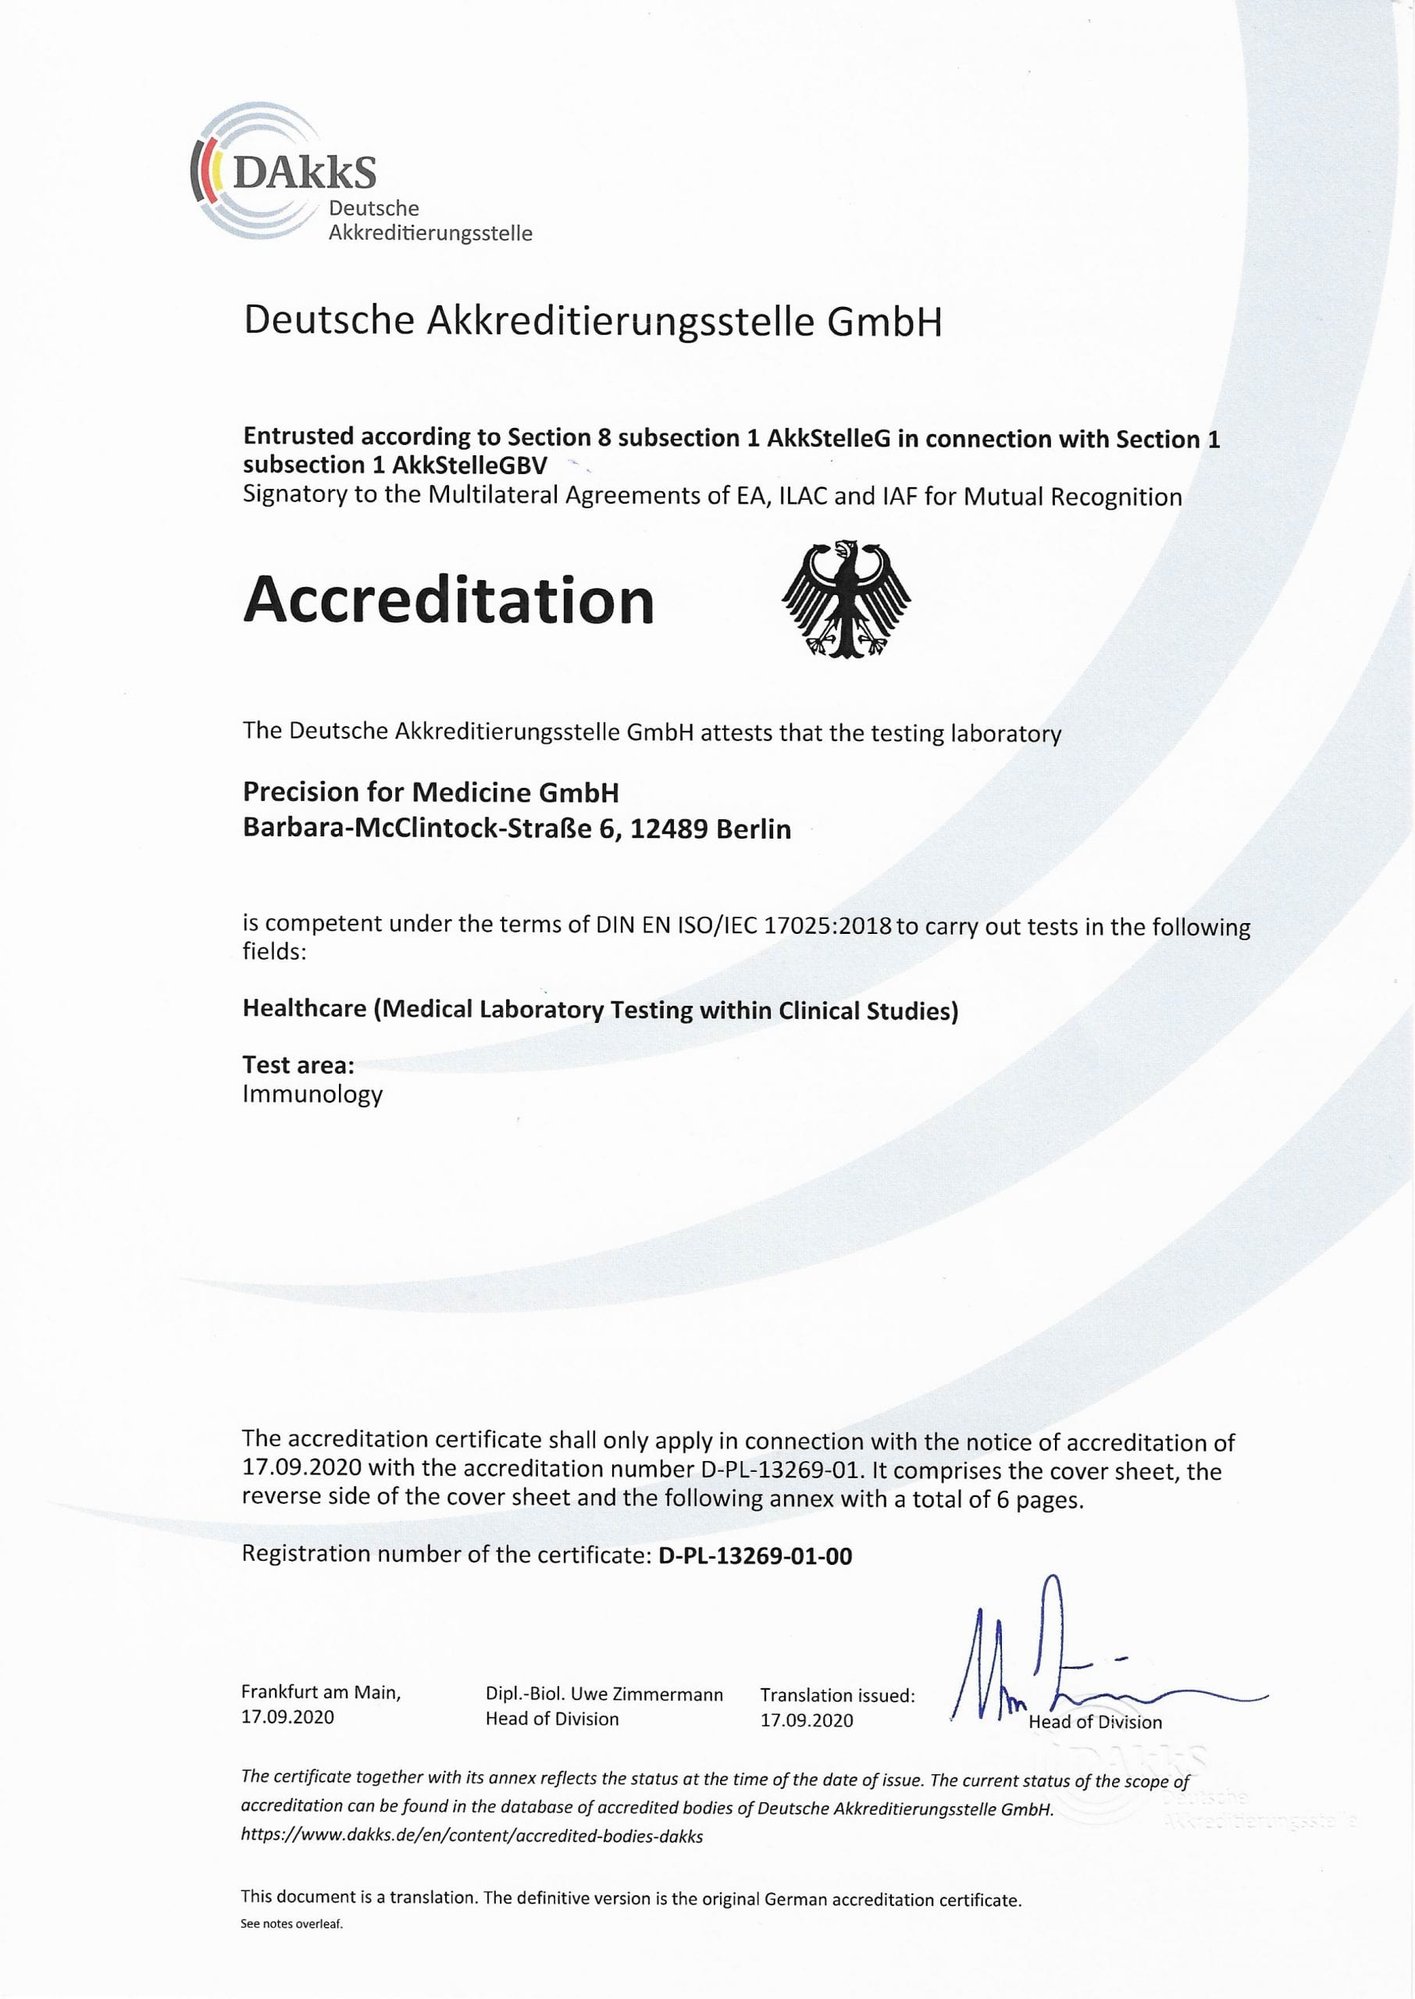 Accreditation-certificate_2020_Page_1-scaled